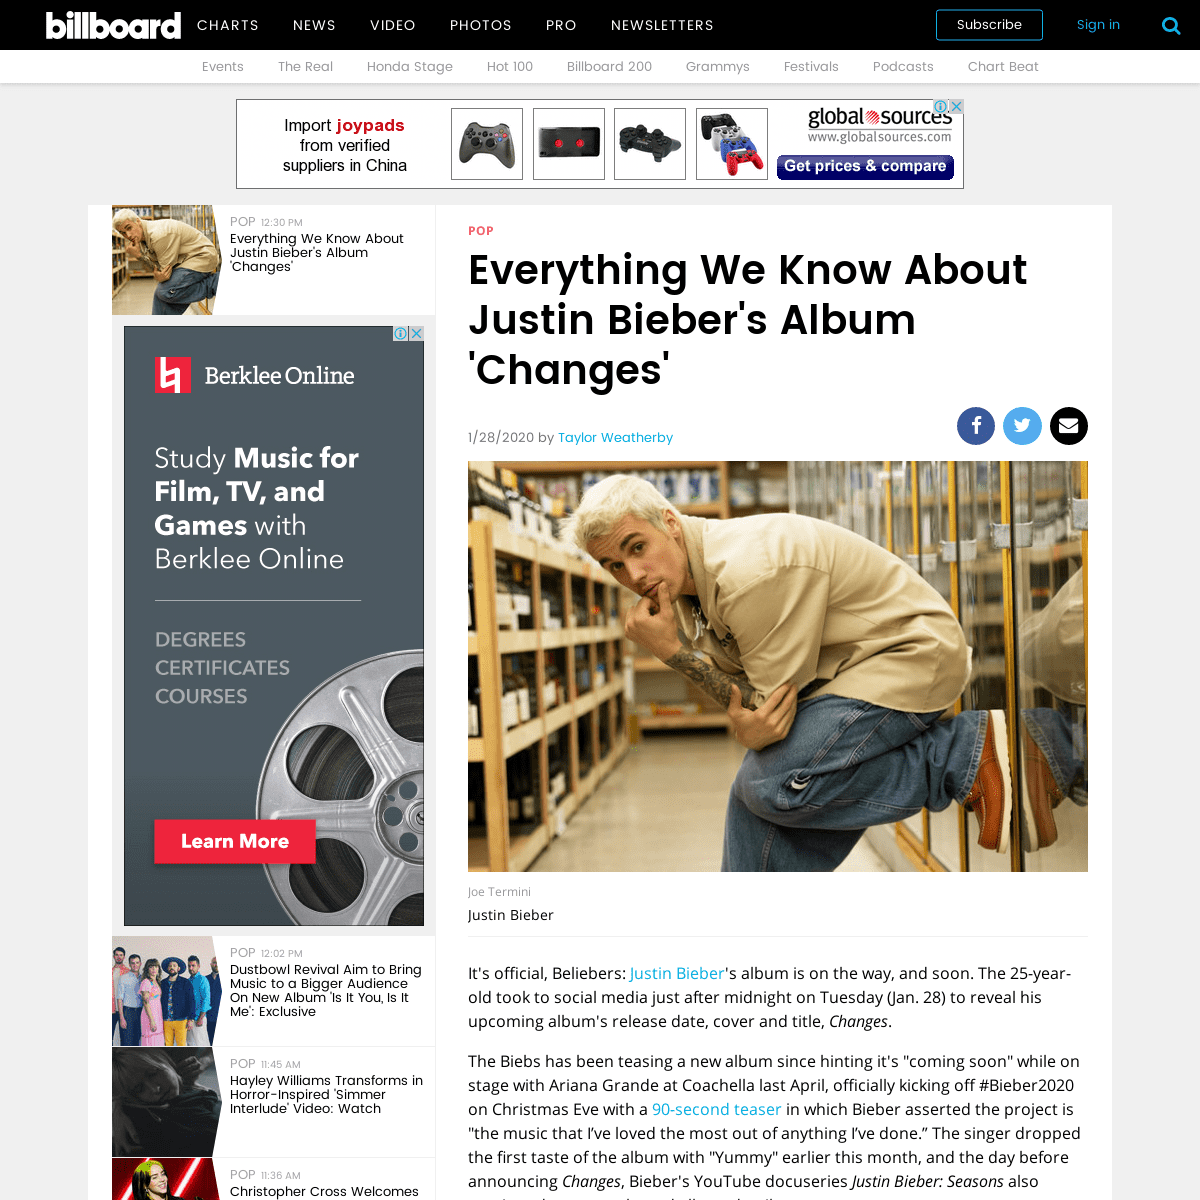 A complete backup of www.billboard.com/articles/columns/pop/8549430/justin-bieber-new-album-changes-everything-we-know